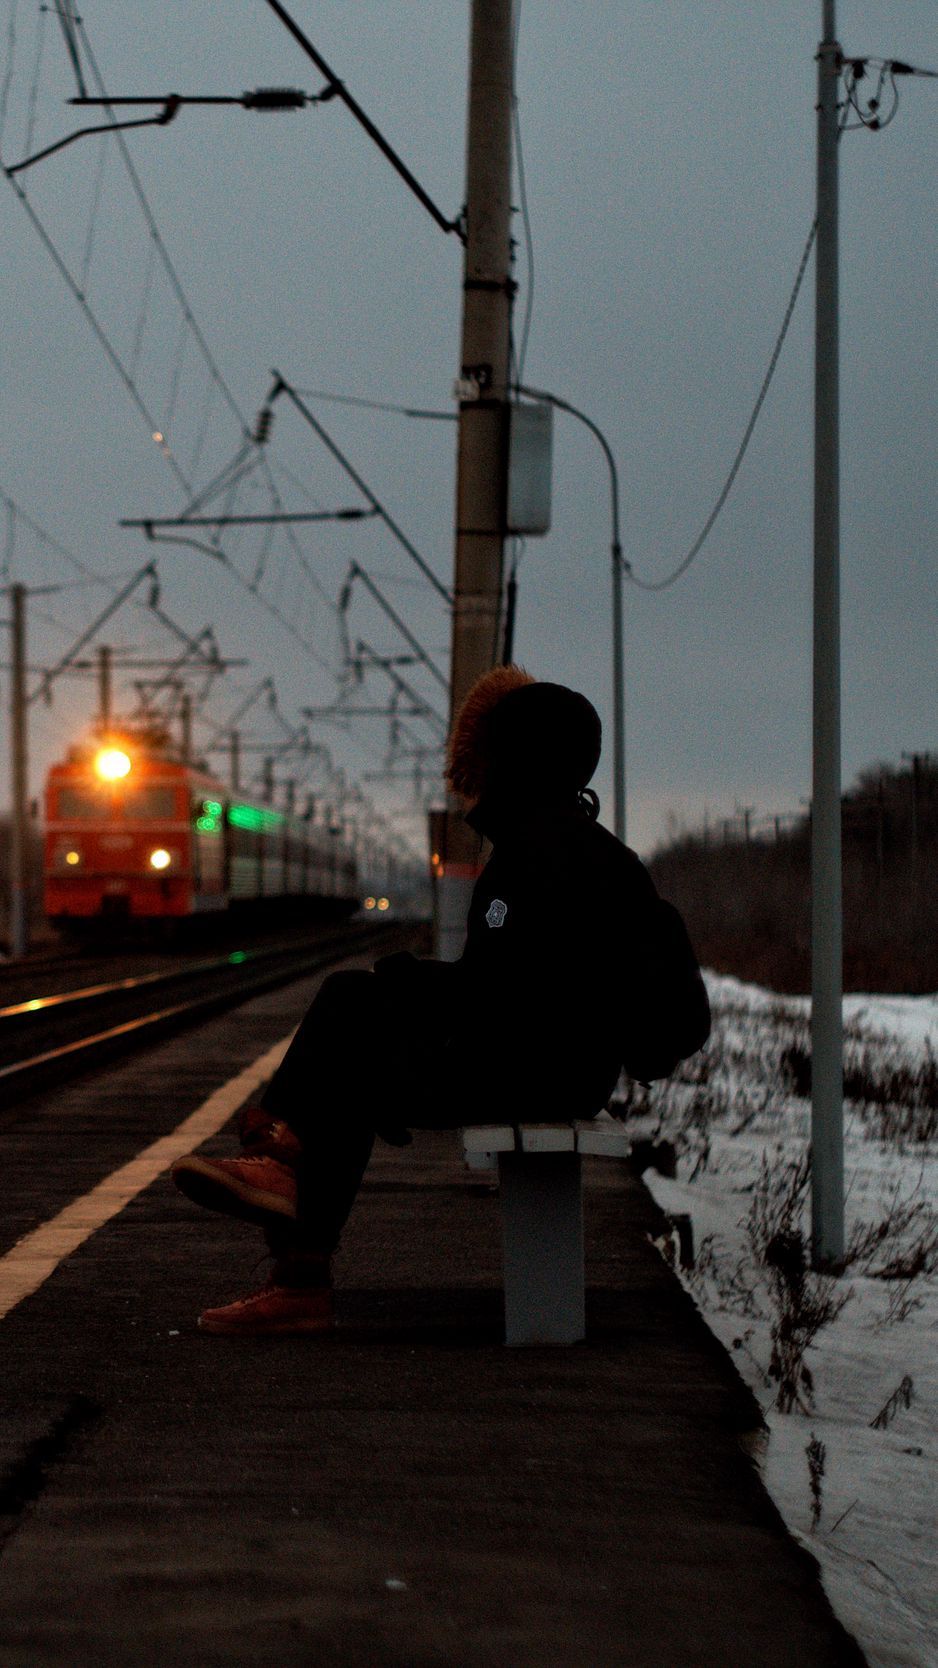 Download wallpapers 938x1668 silhouette, alone, sad, train, station